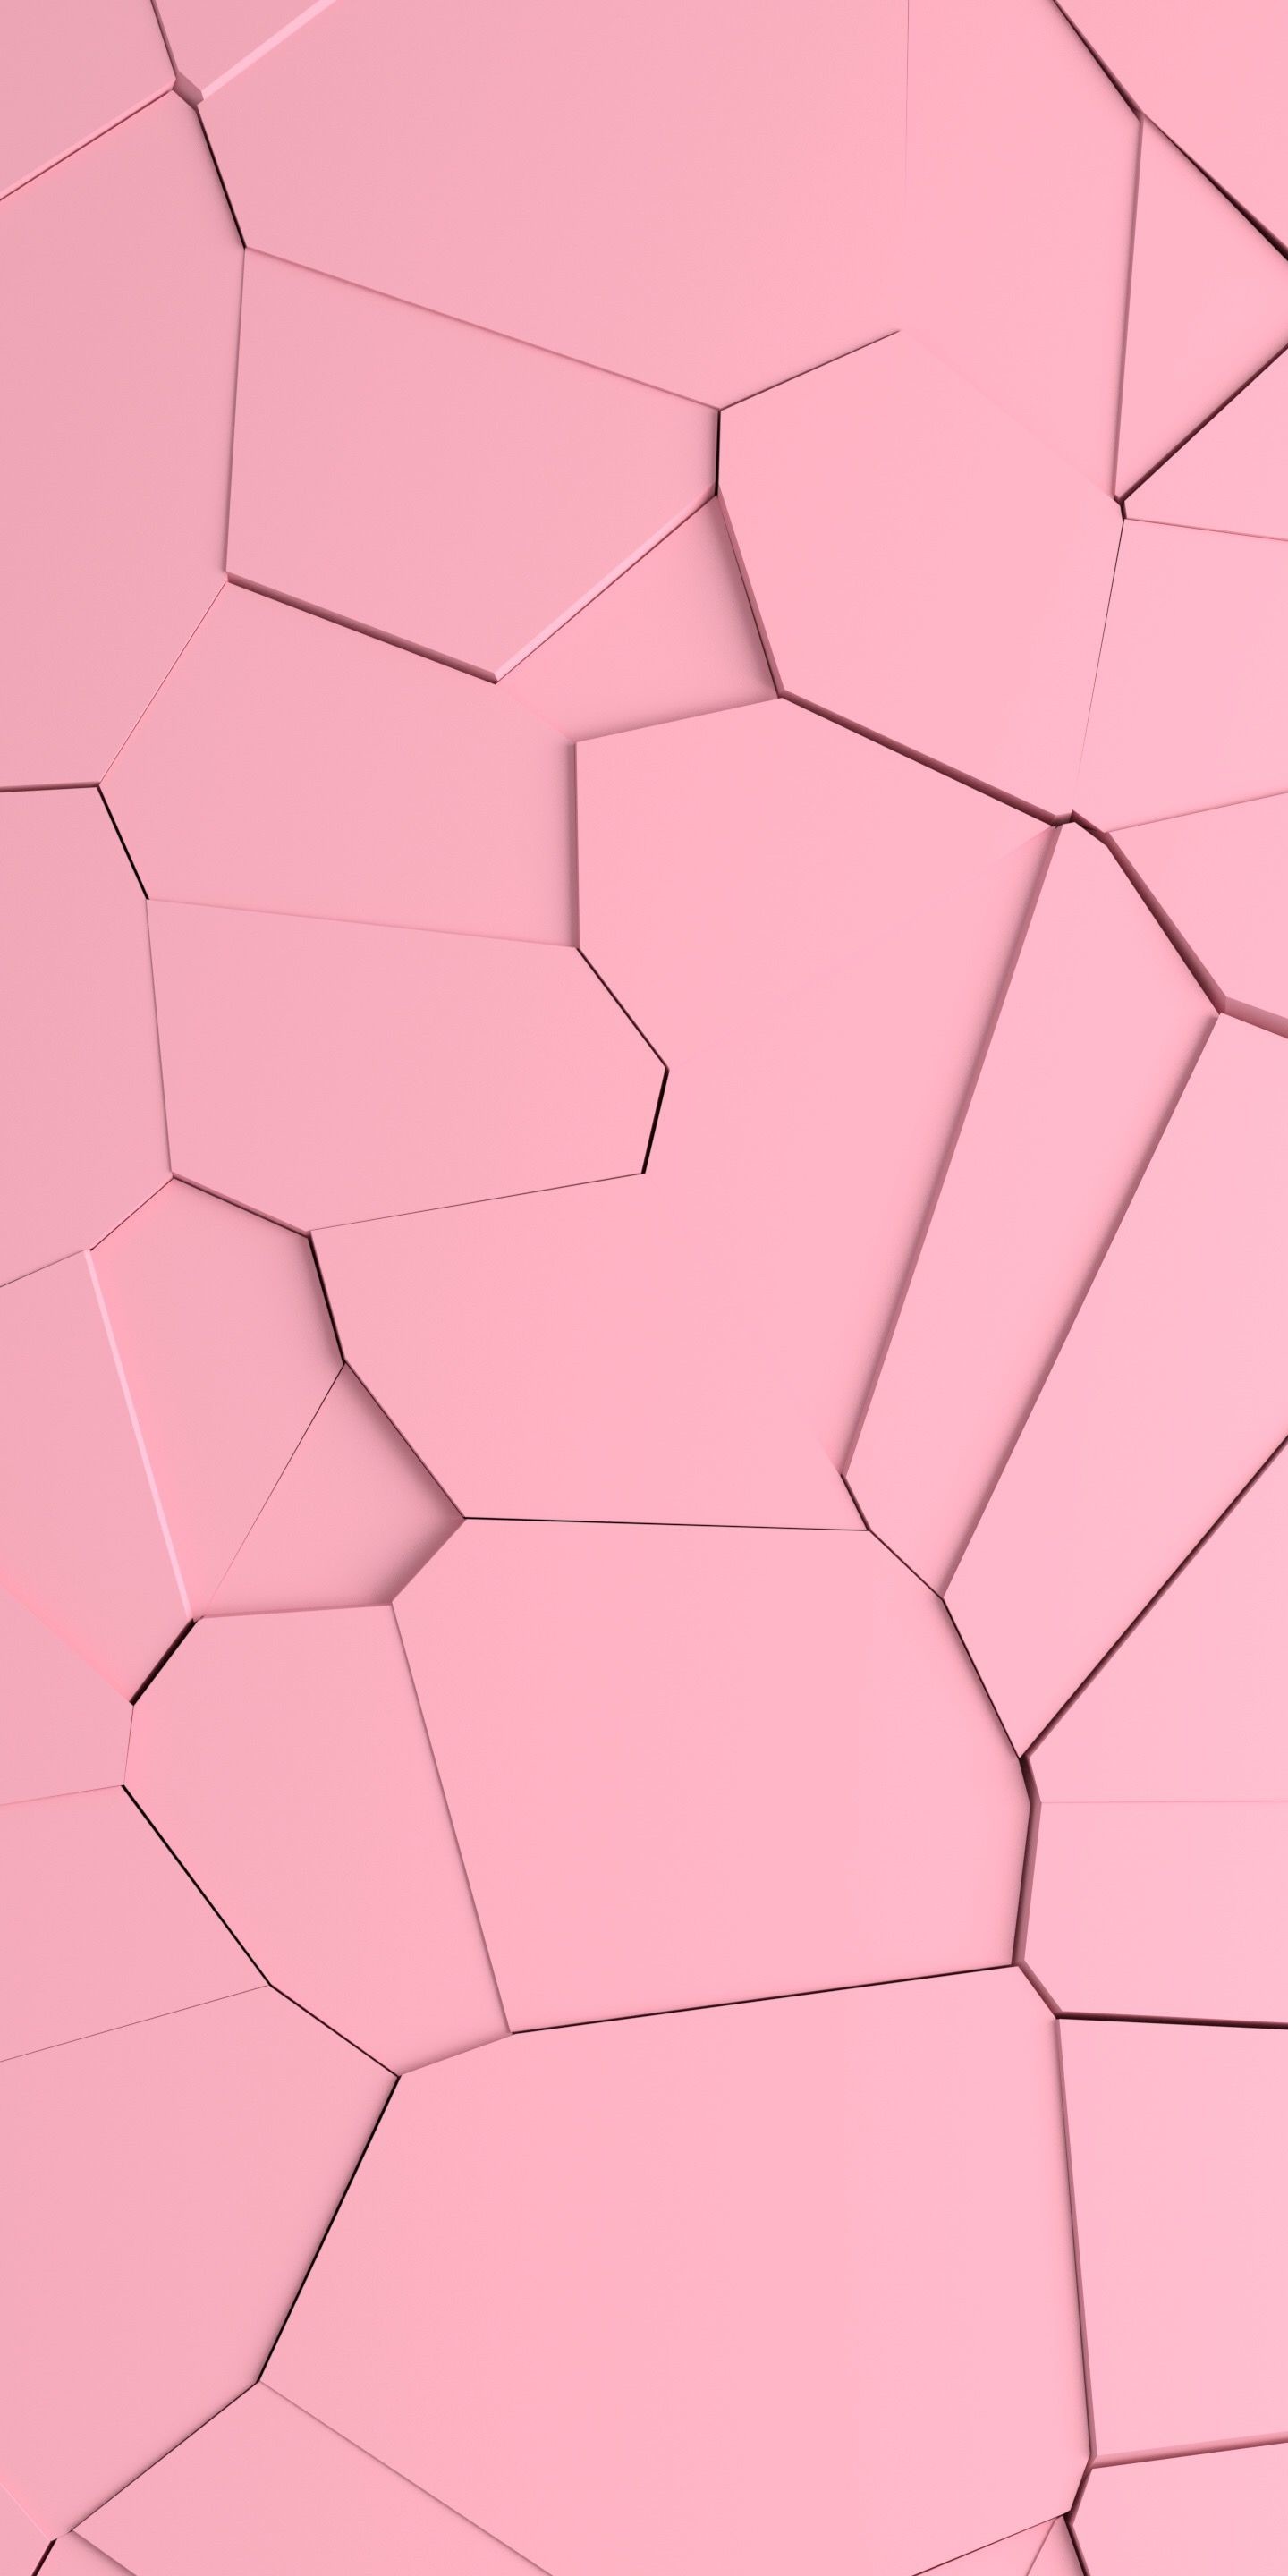 1440x2880 Marble cracked iPhone wallpaper Cracked Wallpaper, Abstract Iphone Wallpaper,  Wallpaper Iphone Cute, Pink